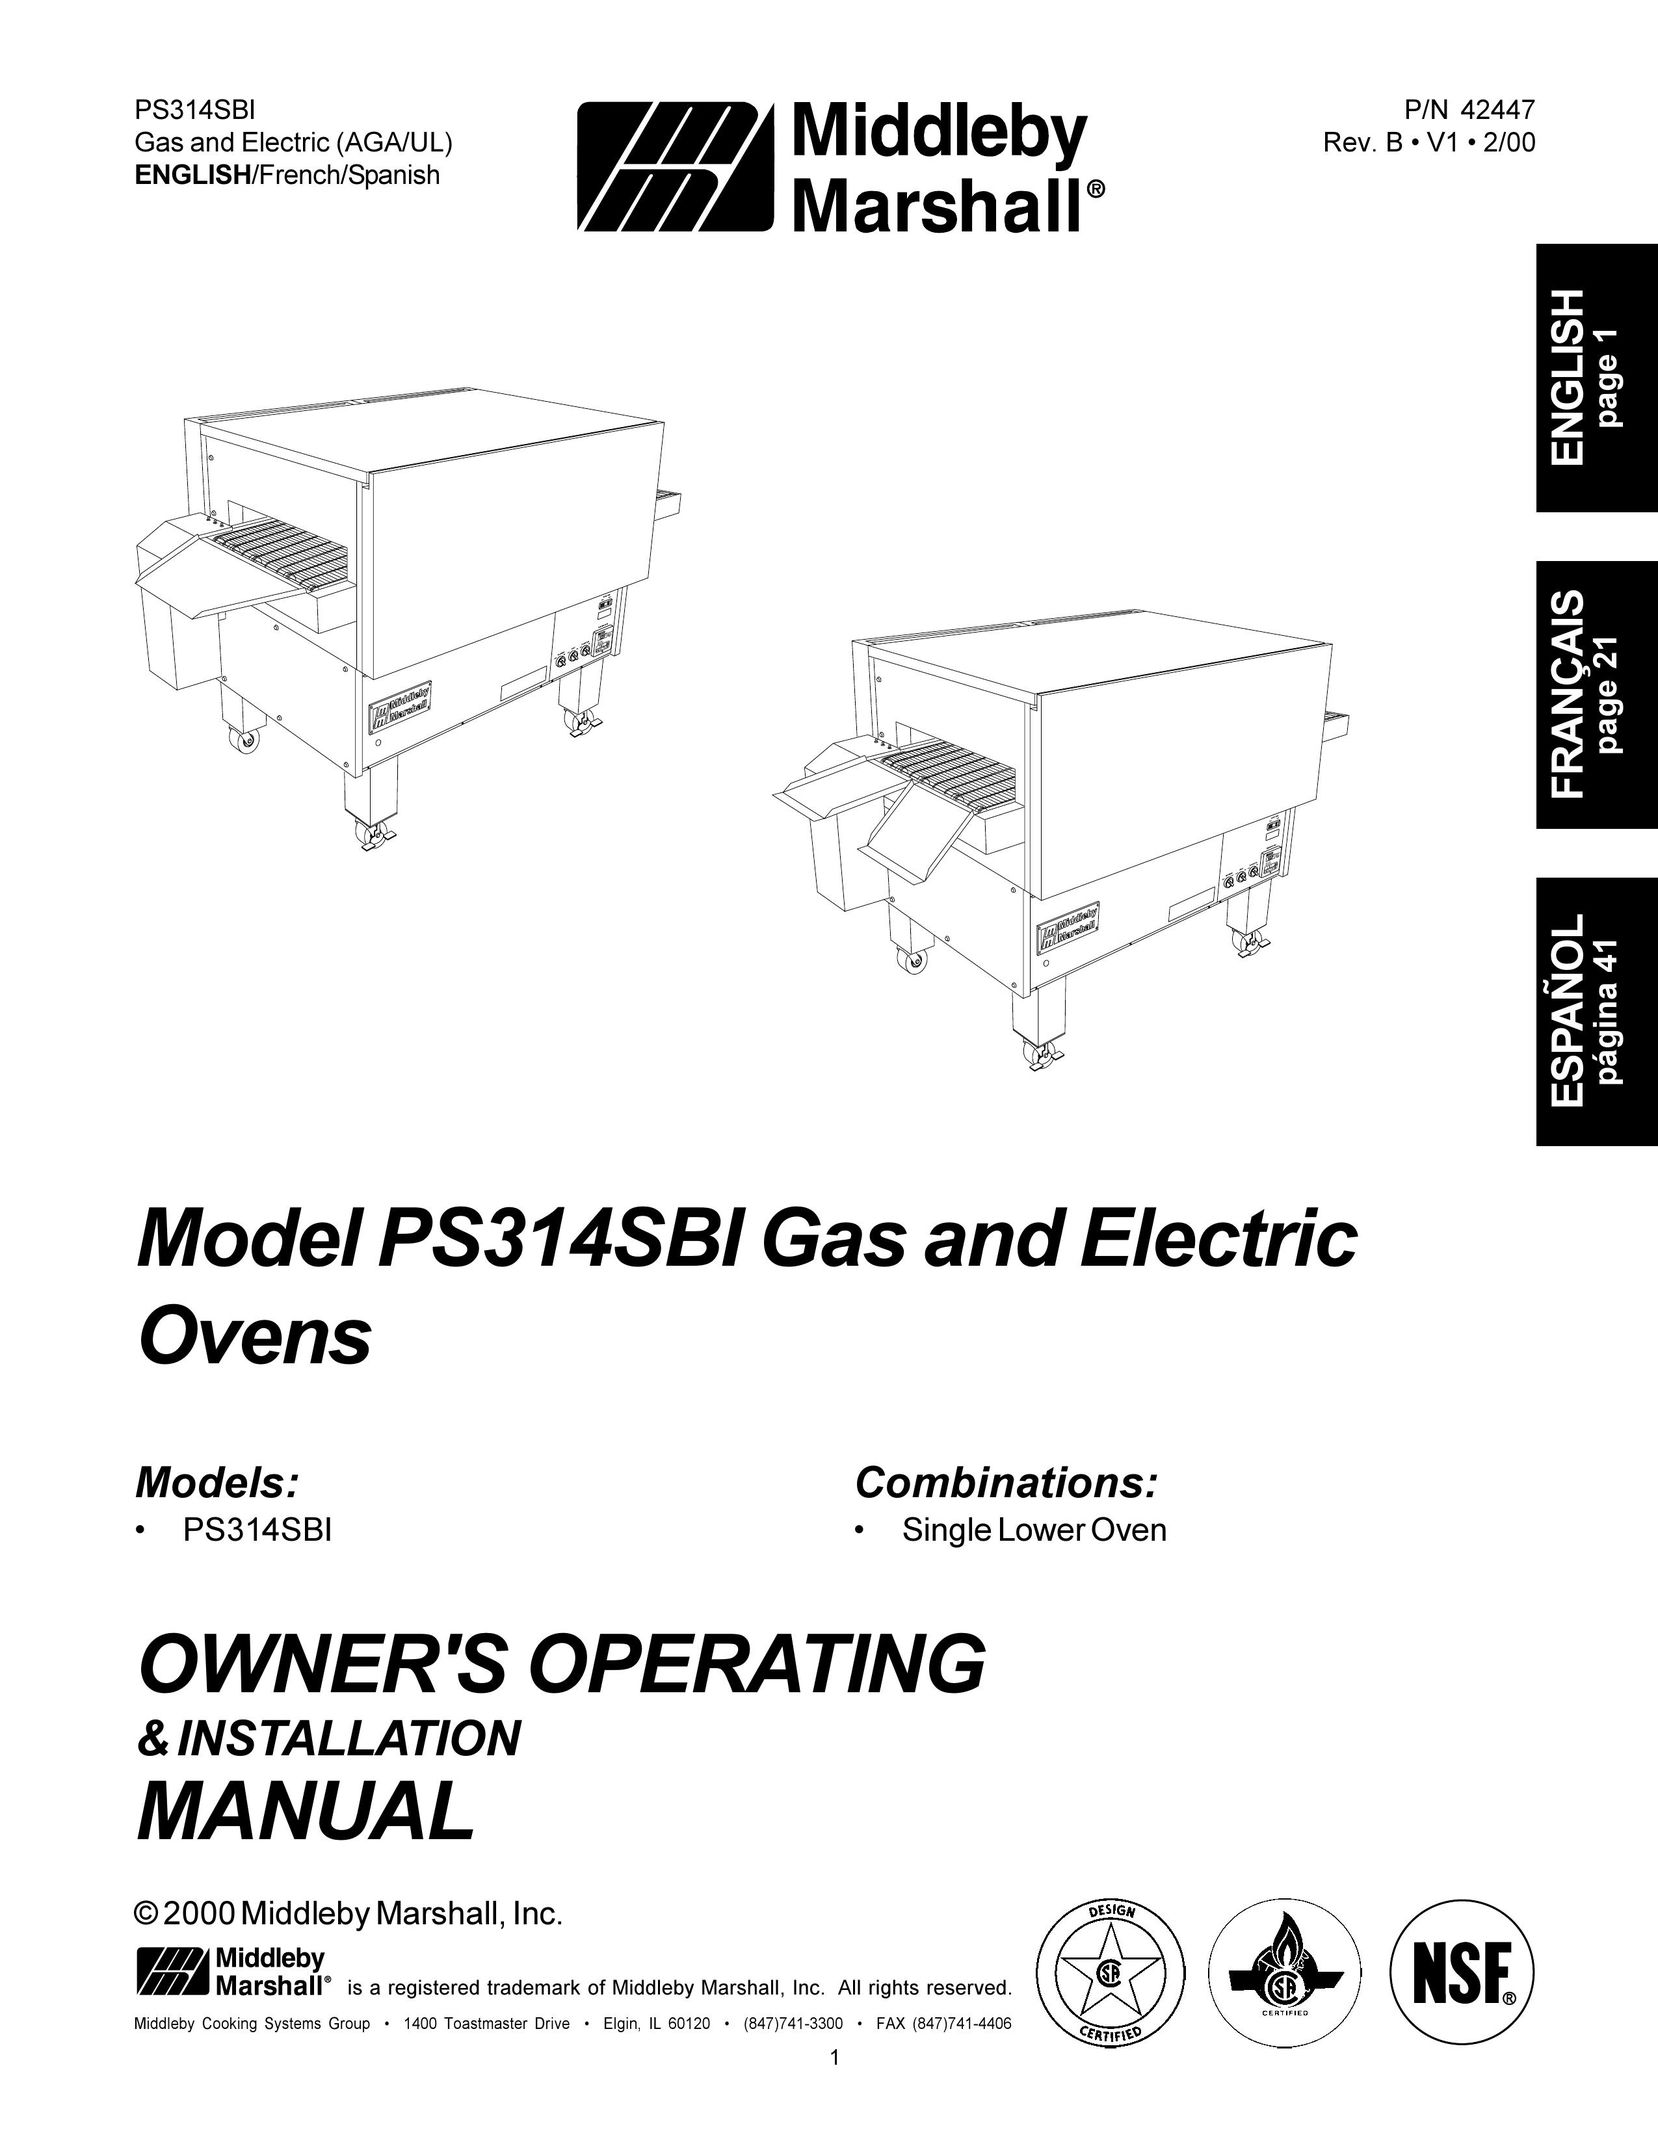 Middleby Marshall PS314SBI Oven User Manual